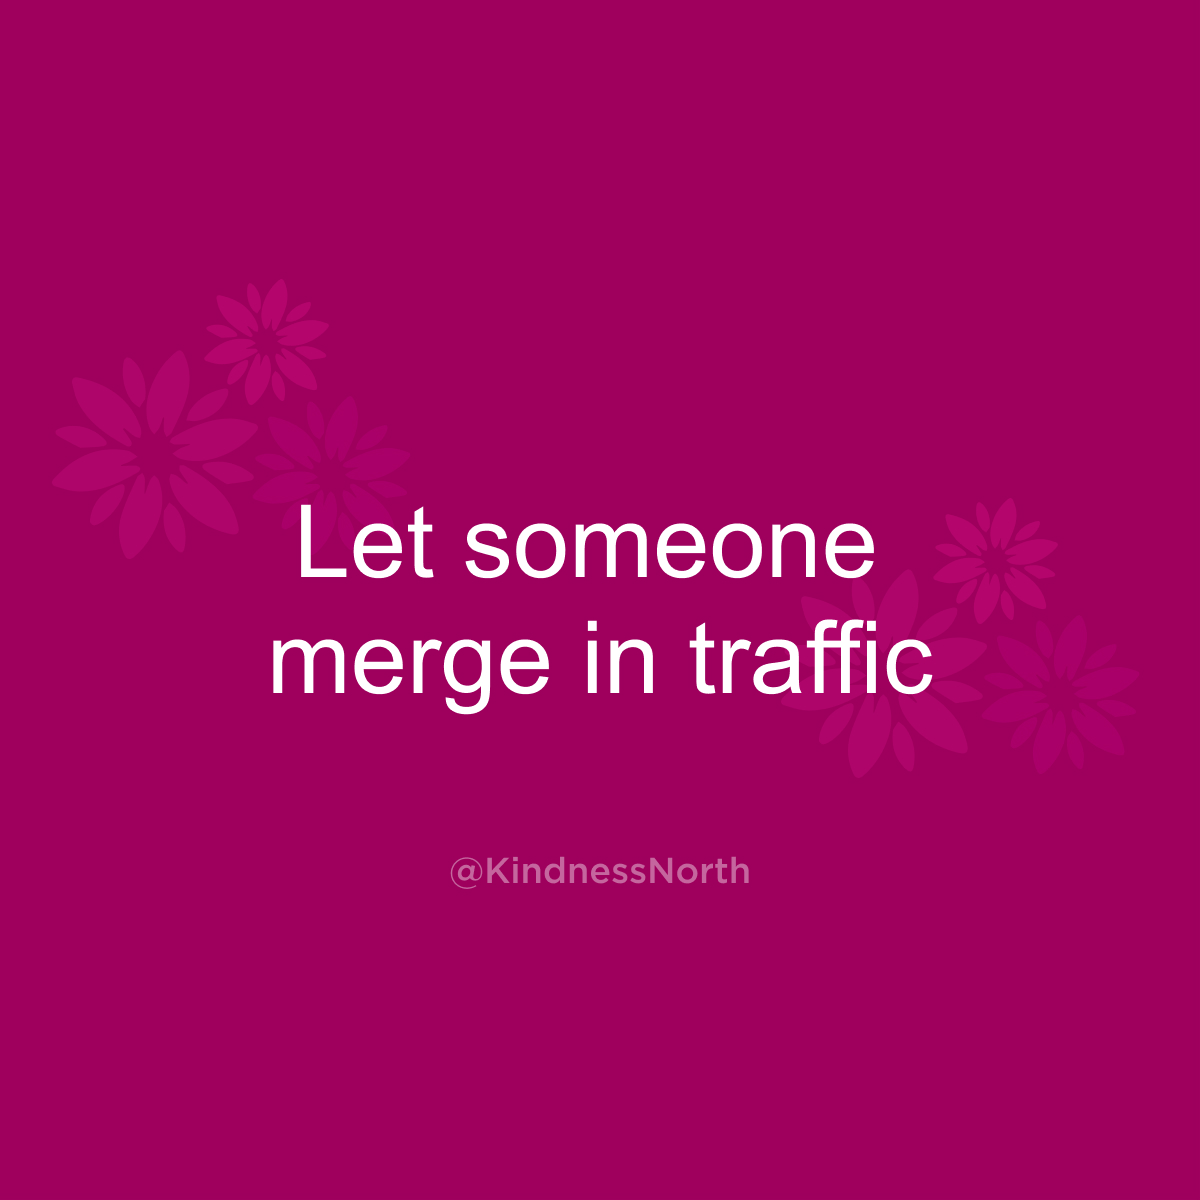 Let someone merge in traffic